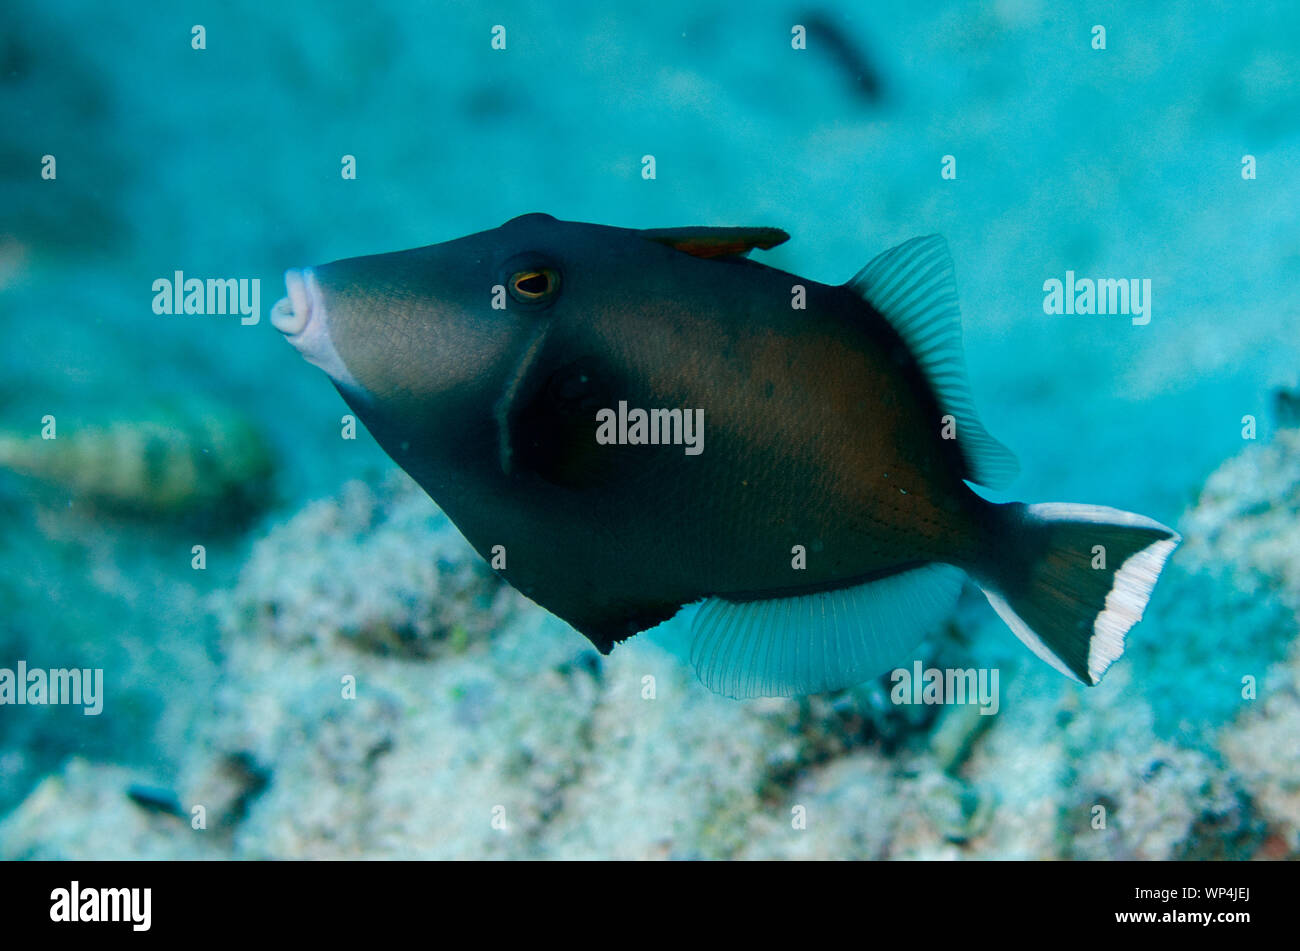 Flagtail Triggerfish, Sufflamen chrysopterum, Too Many Fish dive site, Pulau Koon, central Moluccas, Indonesia Stock Photo